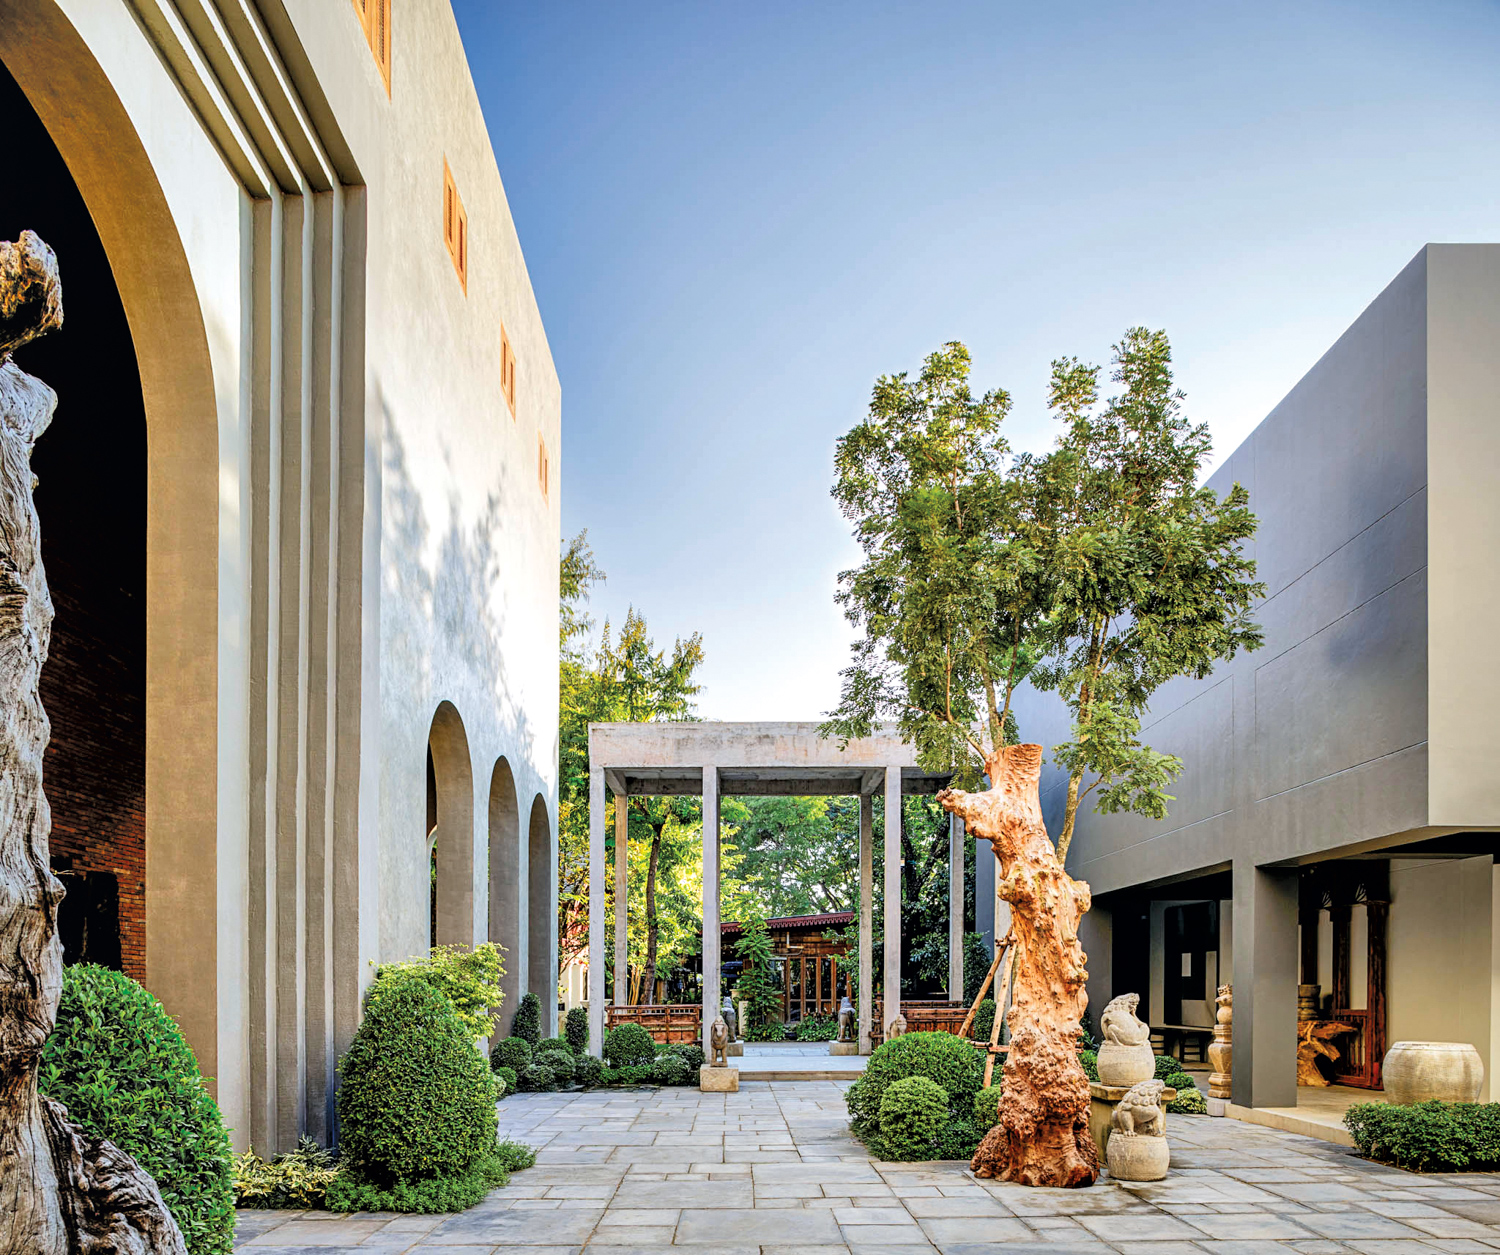 Courtyard with lush green shrubbery and trees accented by stone sculptures